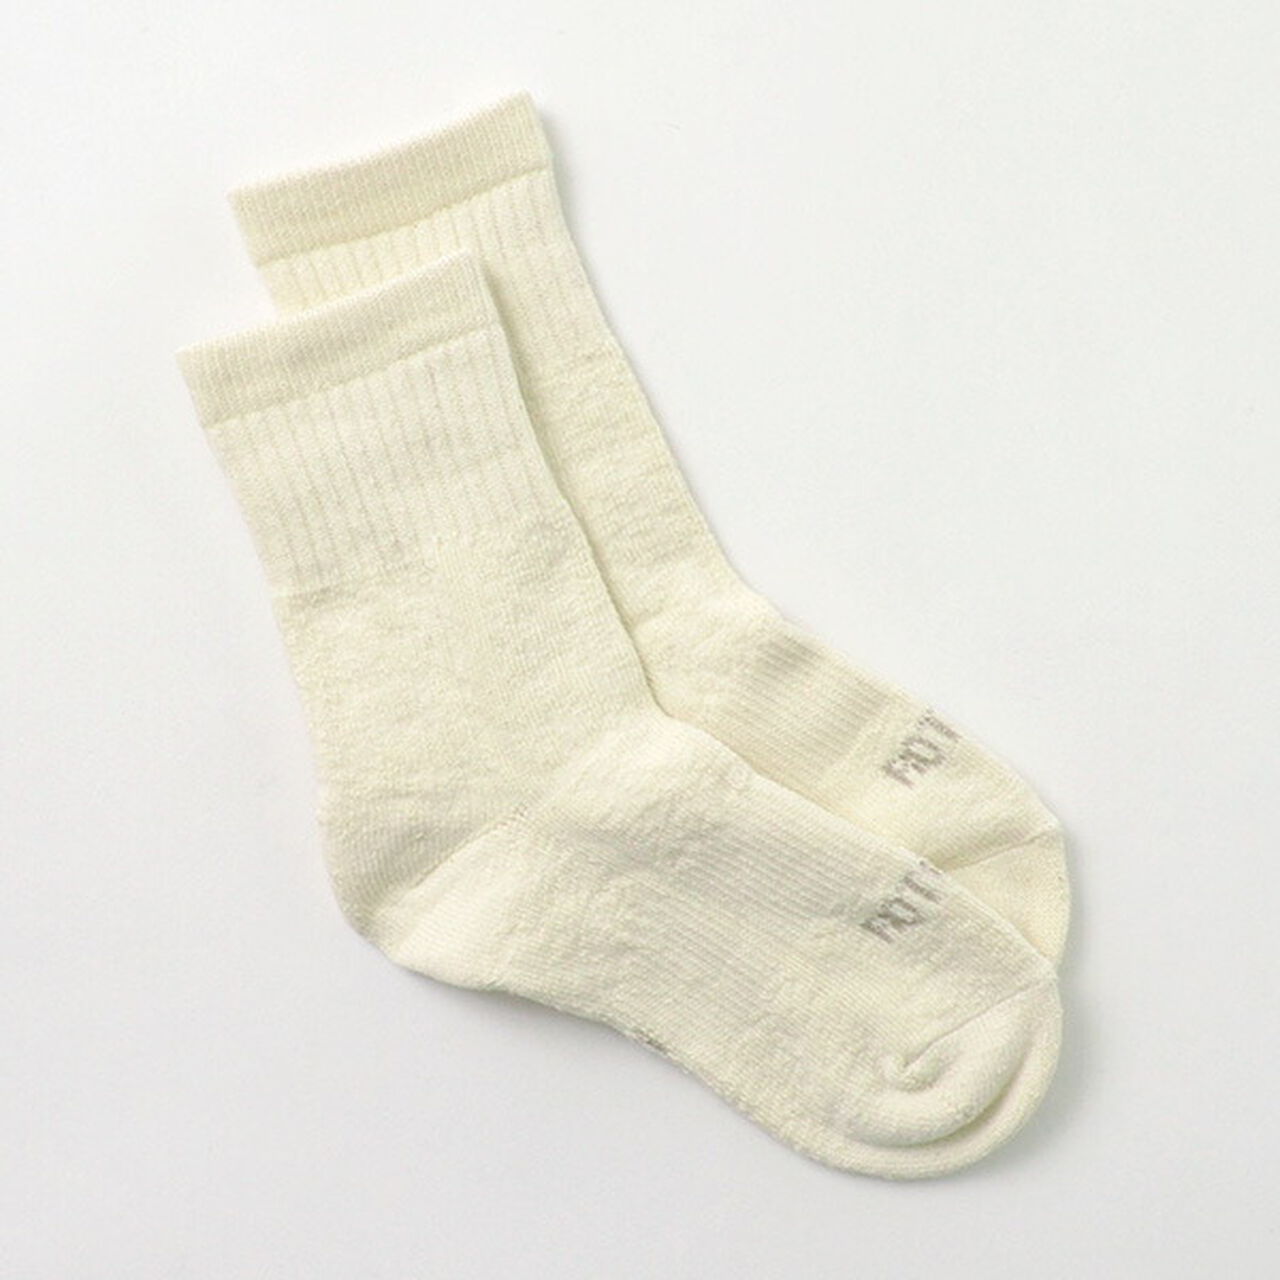 R1380 Double Face Mid Socks Organic Cotton,Ivory, large image number 0